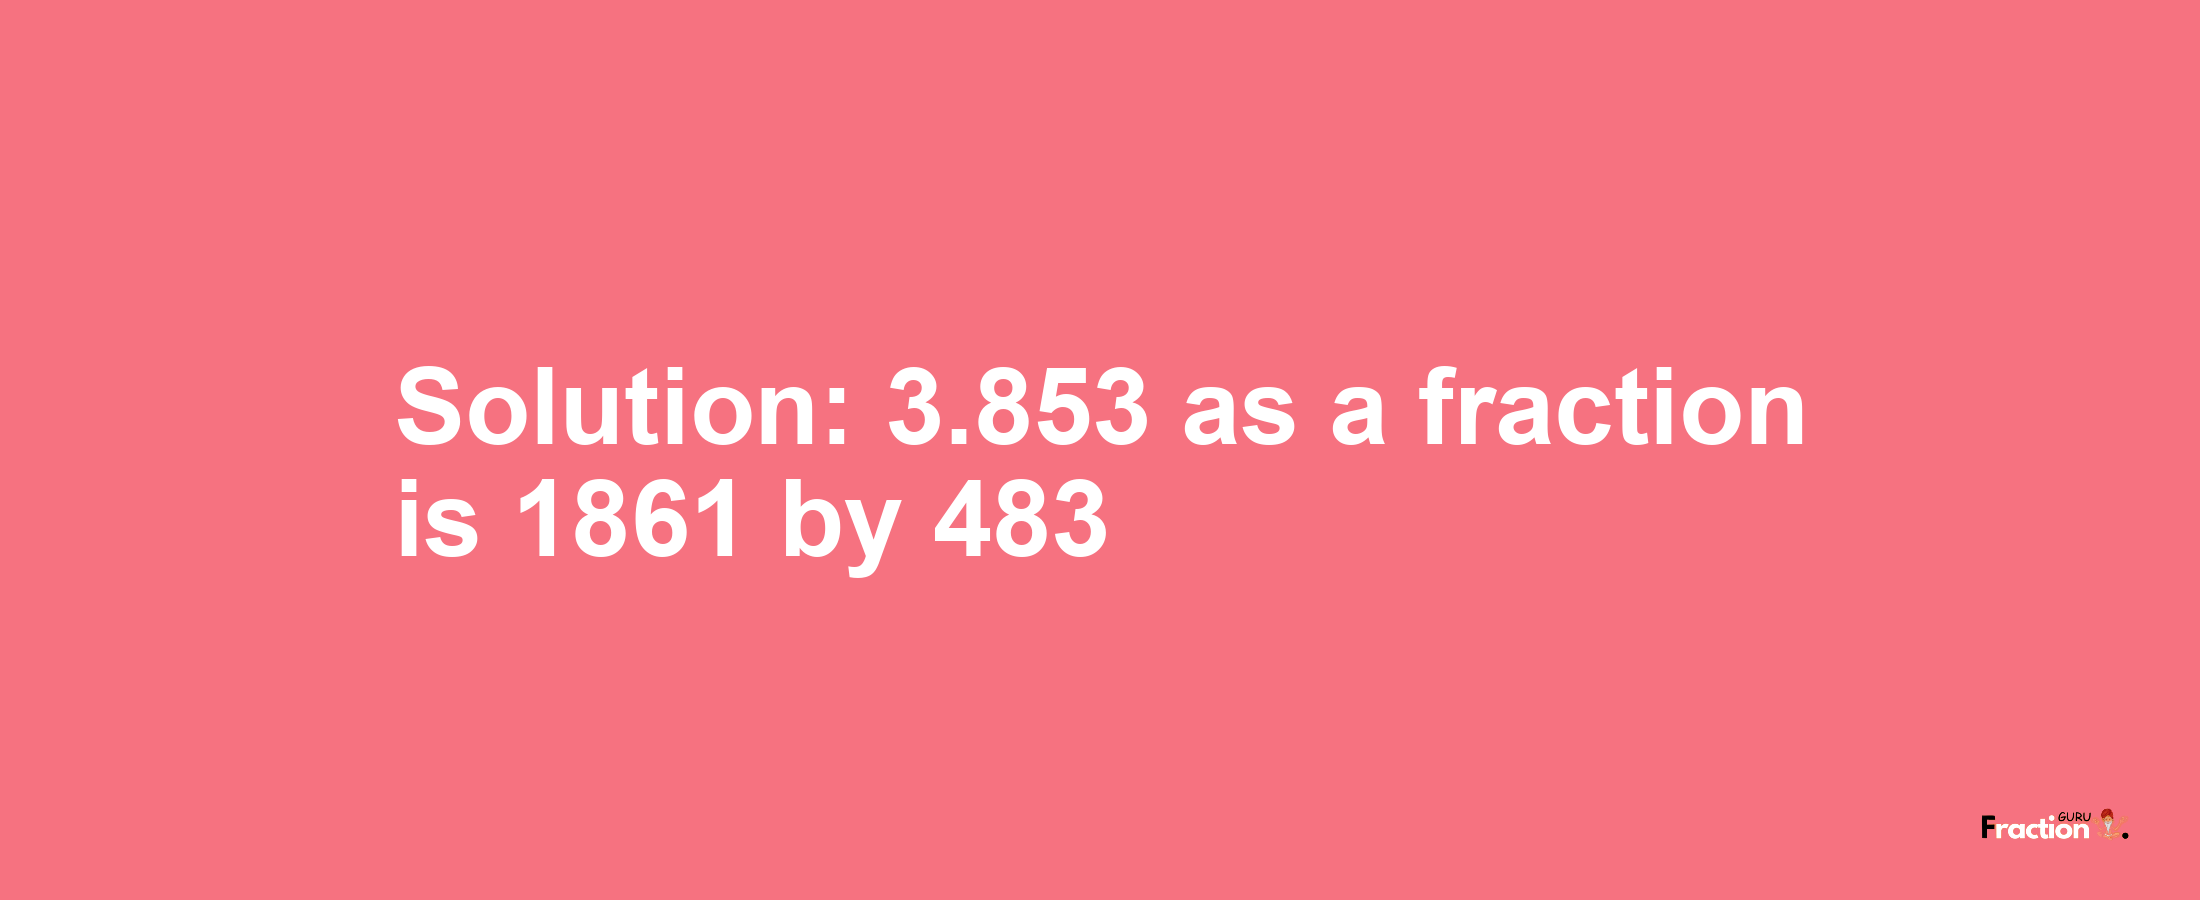 Solution:3.853 as a fraction is 1861/483